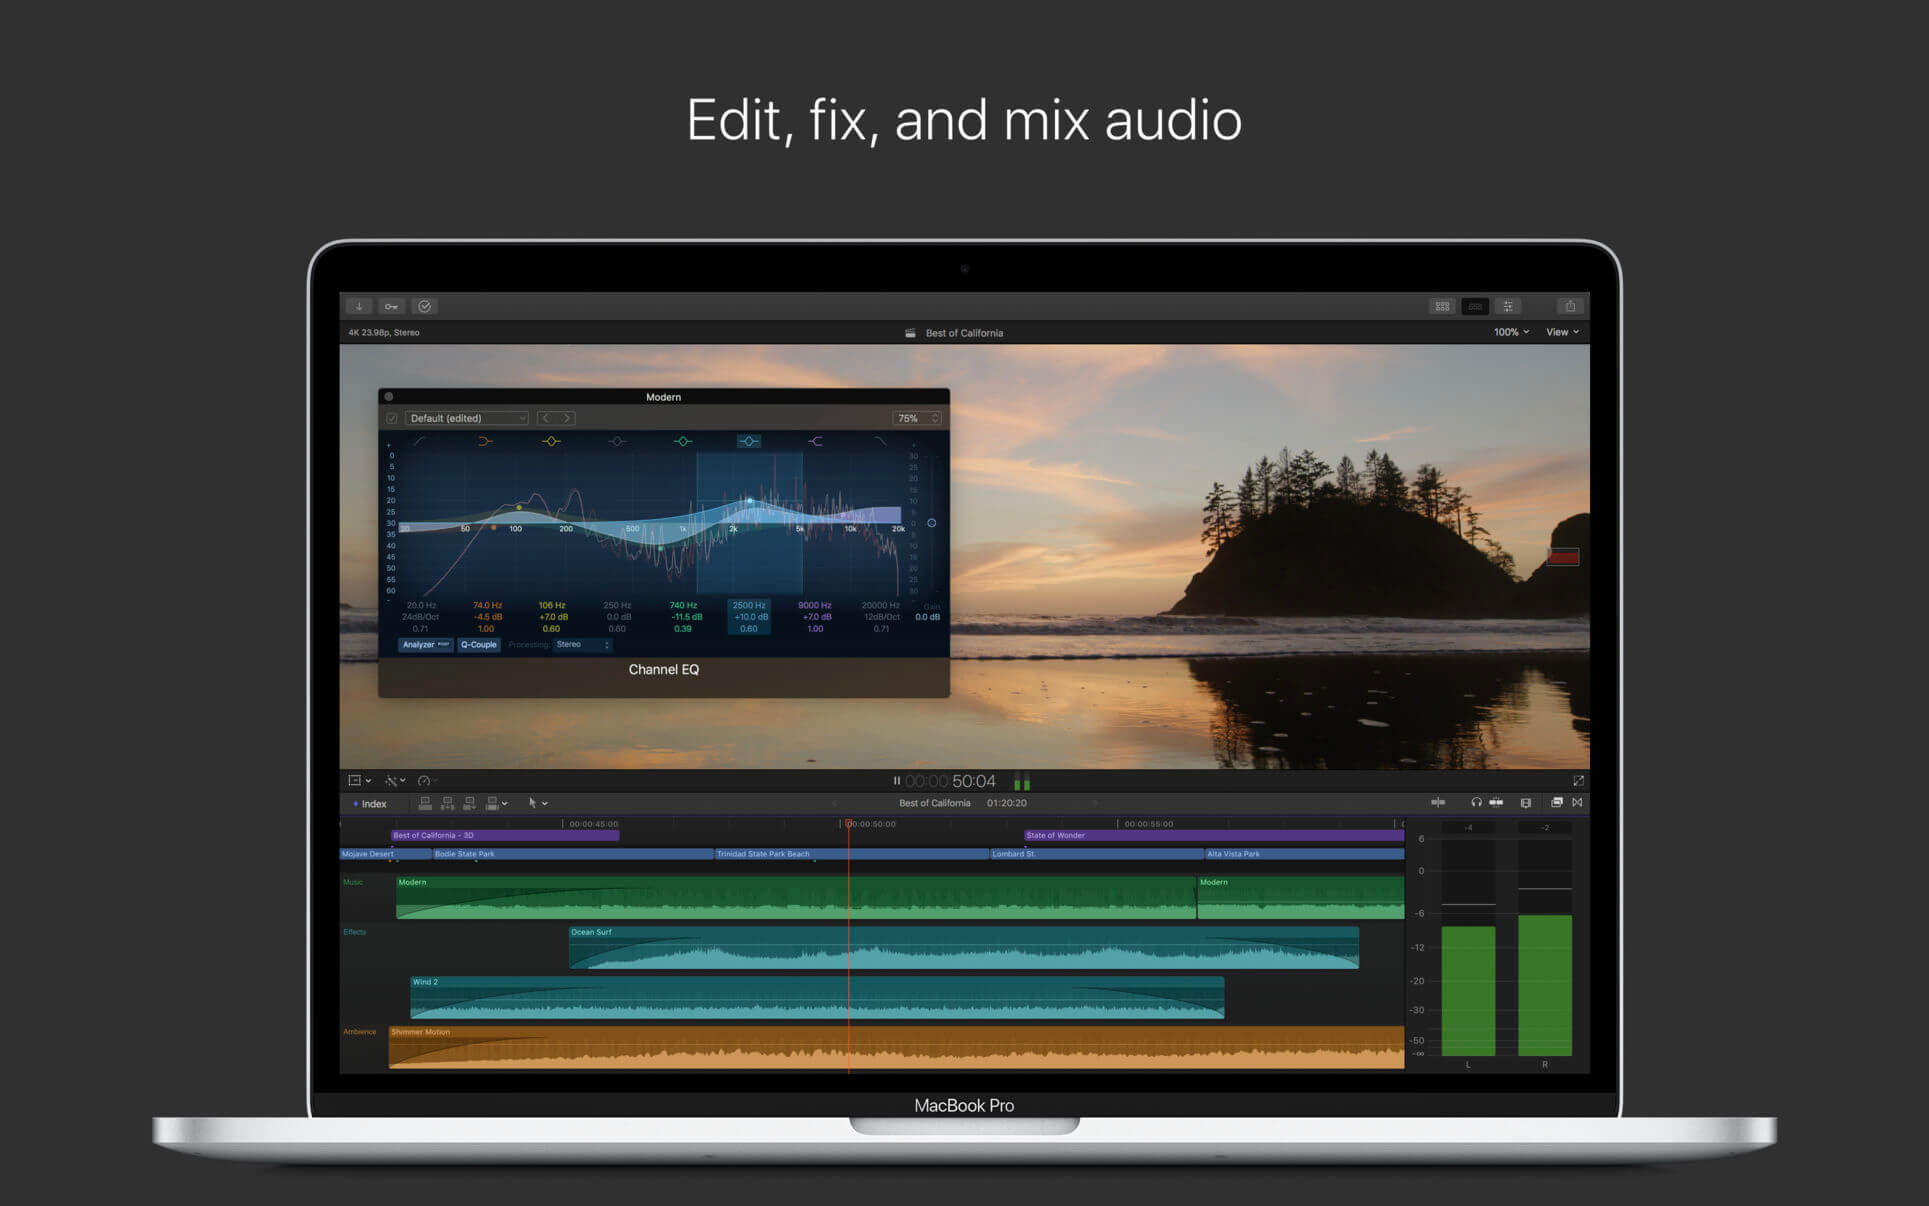 final cut pro trial for old mac versions